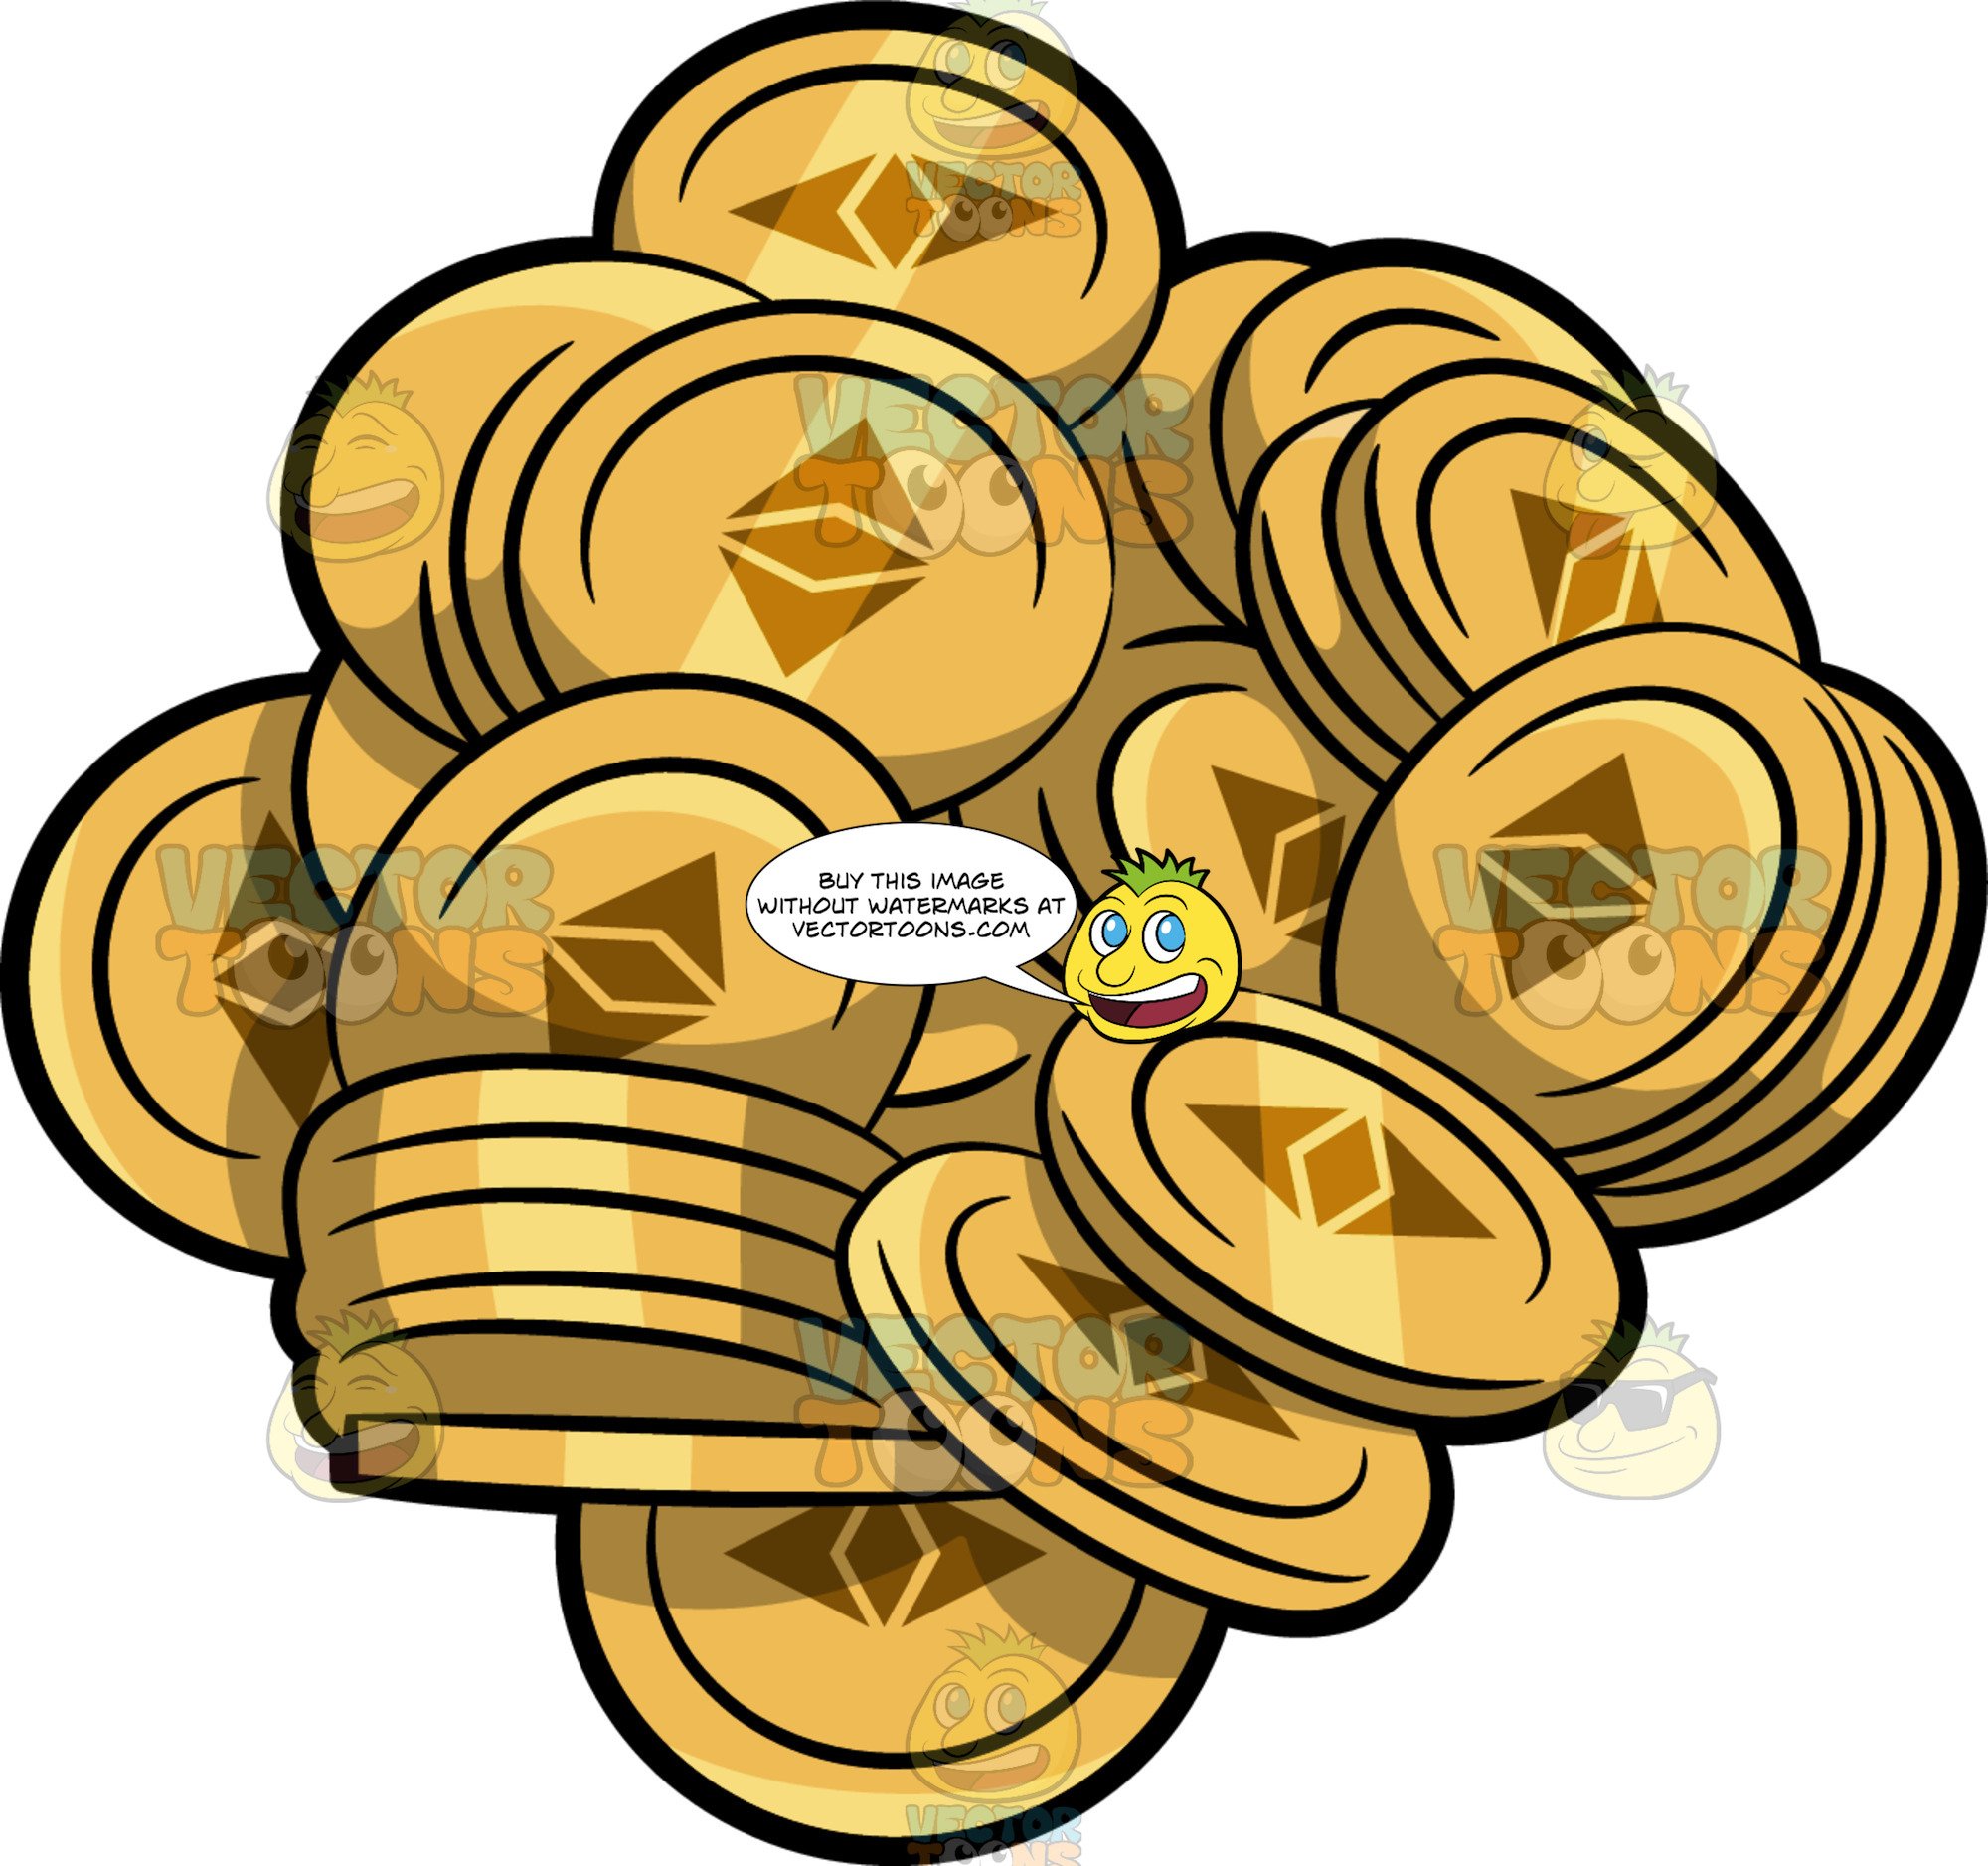 A Pile Of Ethereum Coins.